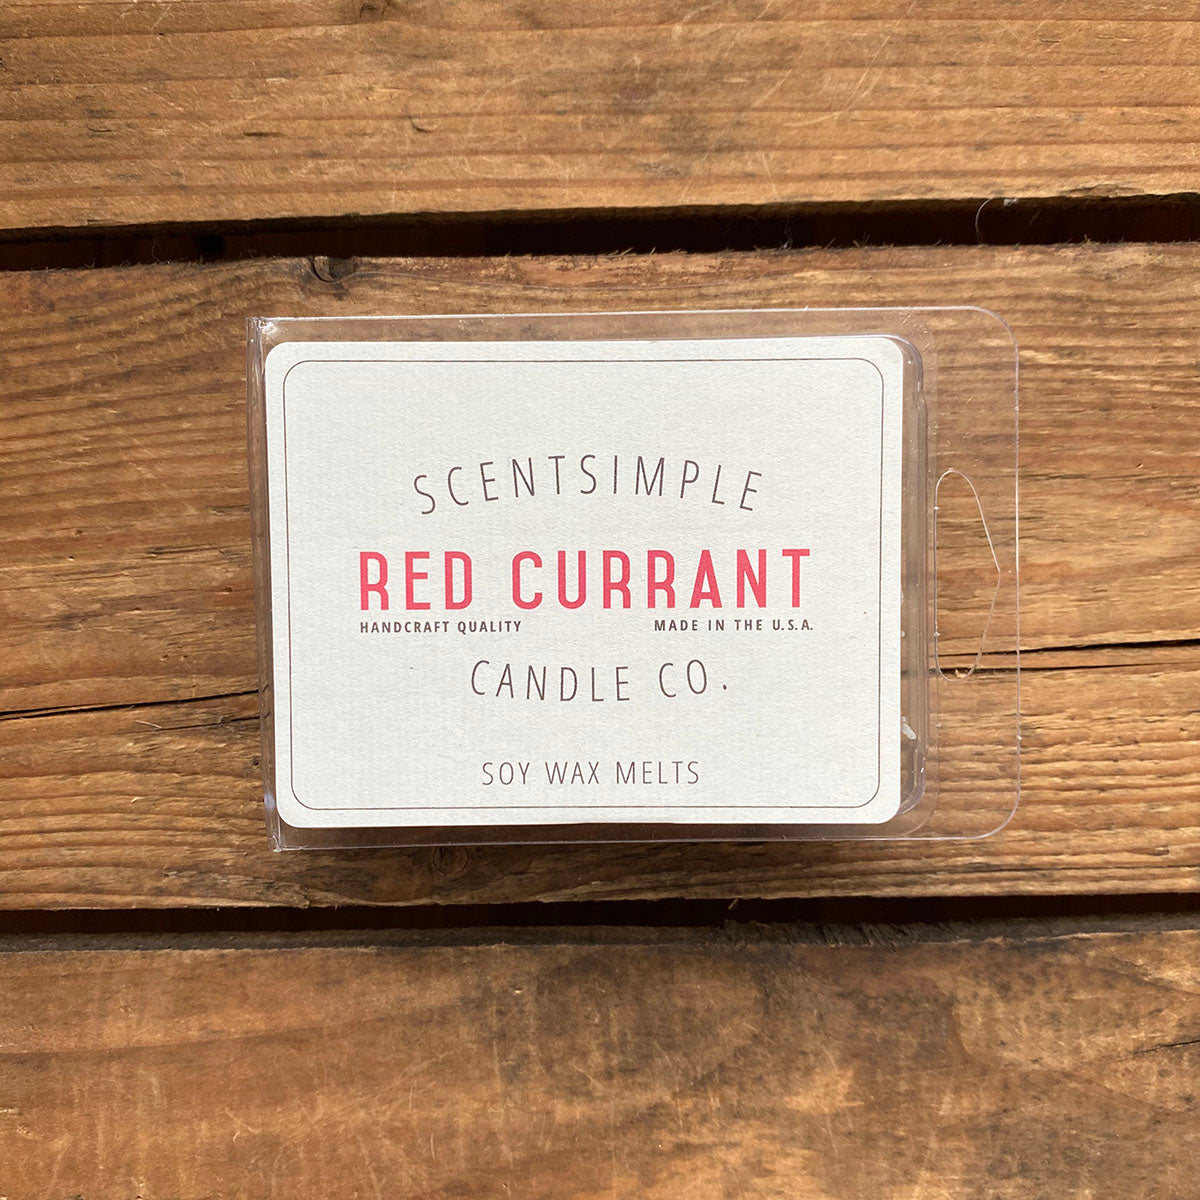 Red Currant Scented Soy Wax Melts